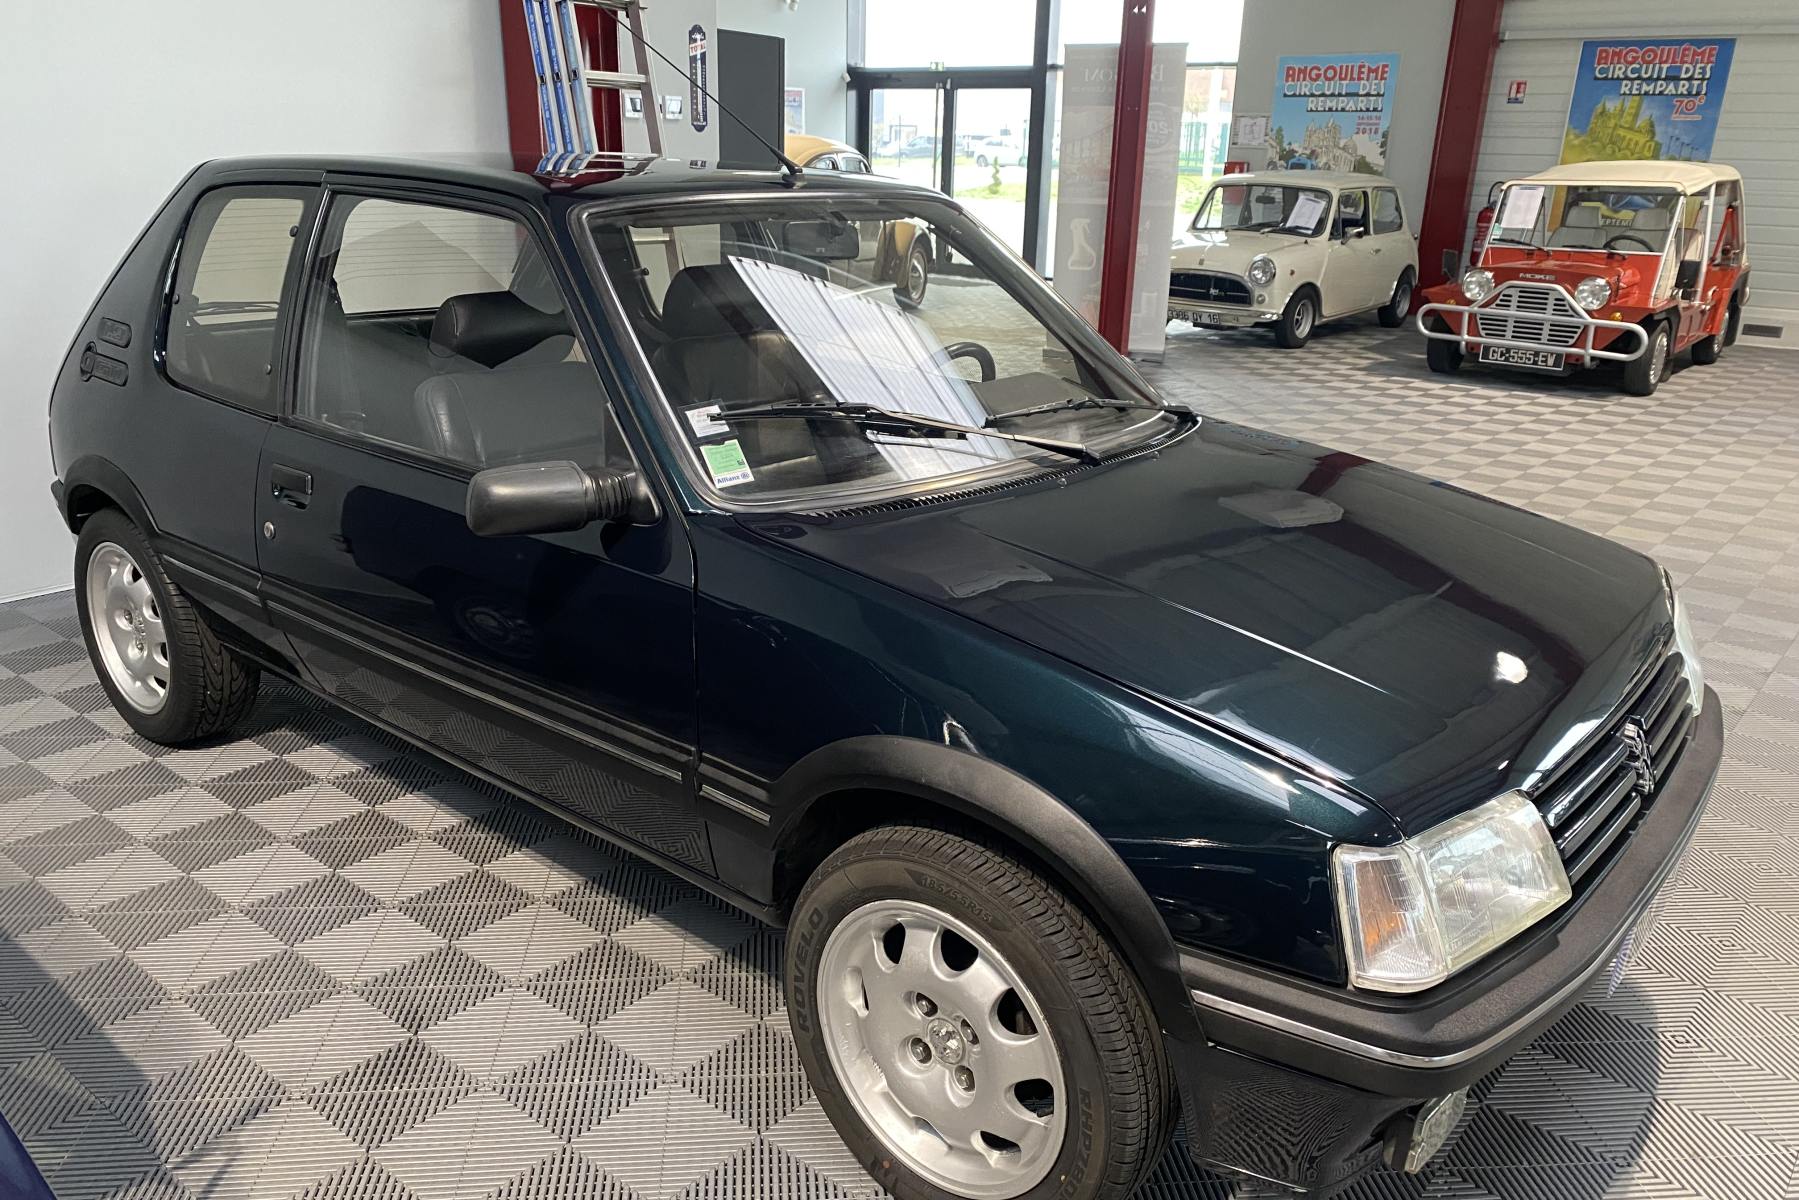 annonce - vente - 205 GTI 1.9 Gentry - Peugeot - Classic Auto Restor - Angouleme - Charente - France